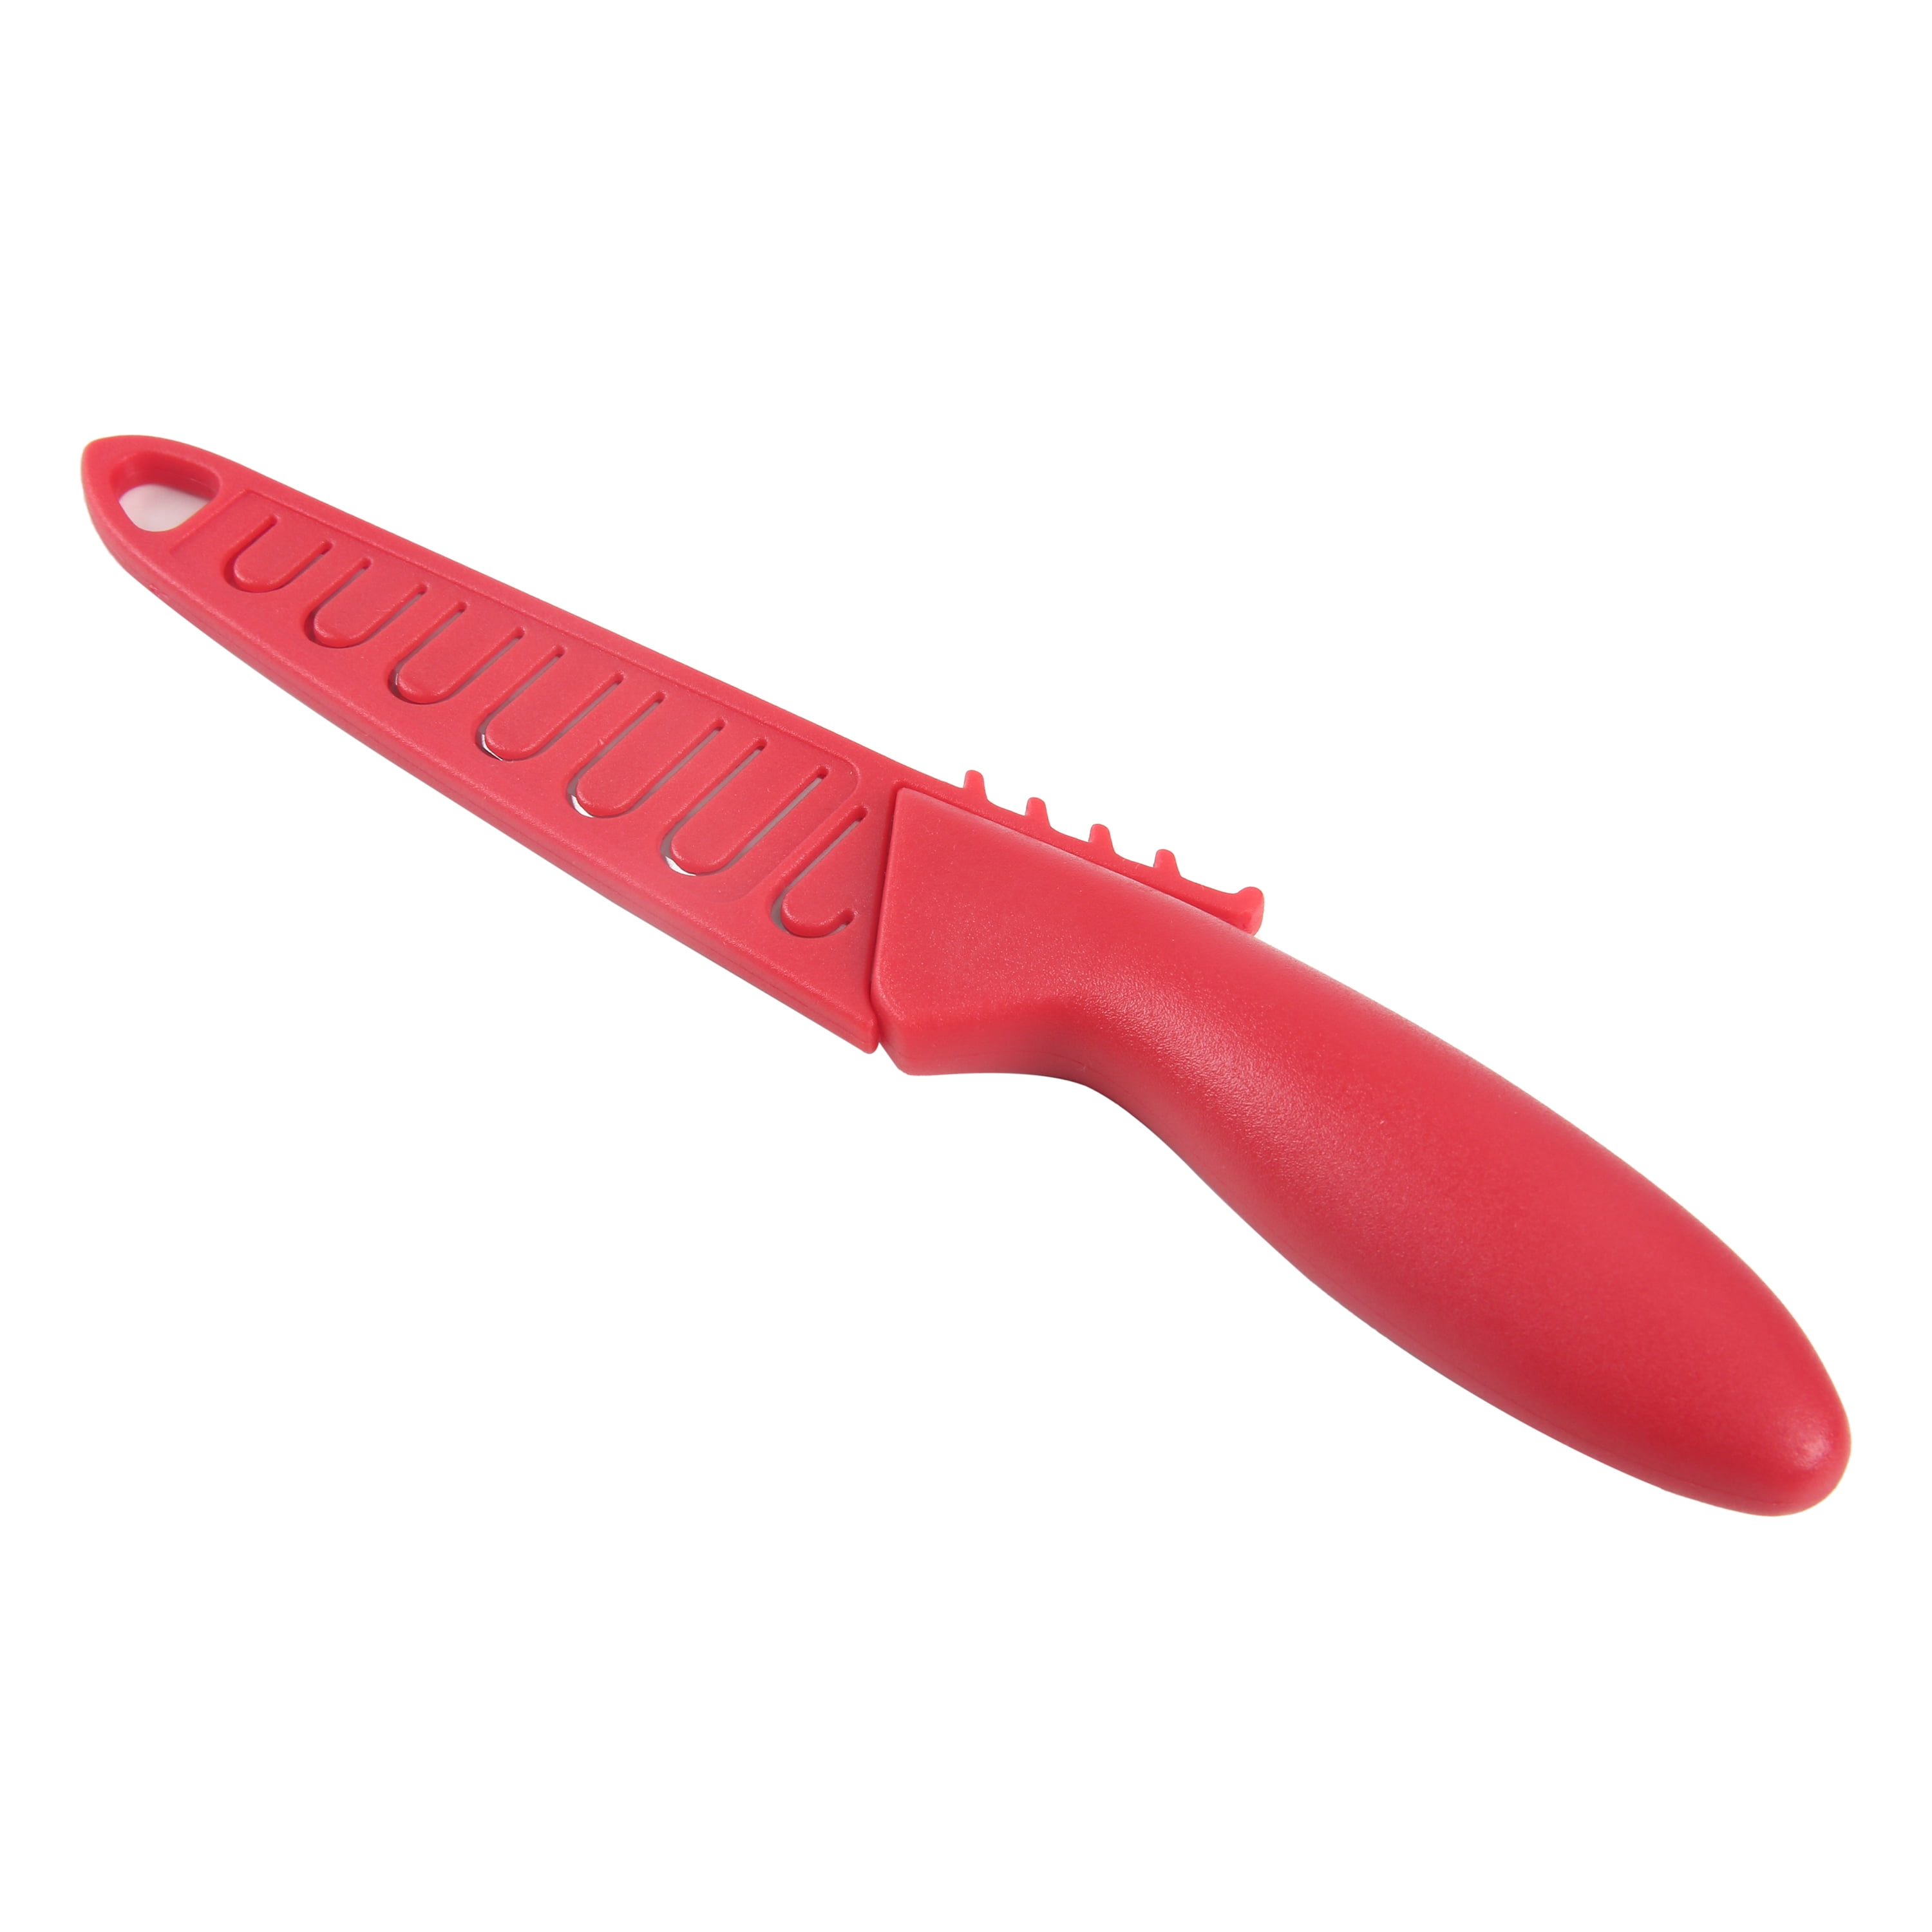 Meat Red 3” Paring Knife - Sharp Kitchen Knife - Ergonomic Handle, Pointed  Tip - Color Coded Kitchen Tools by The Kosher Cook